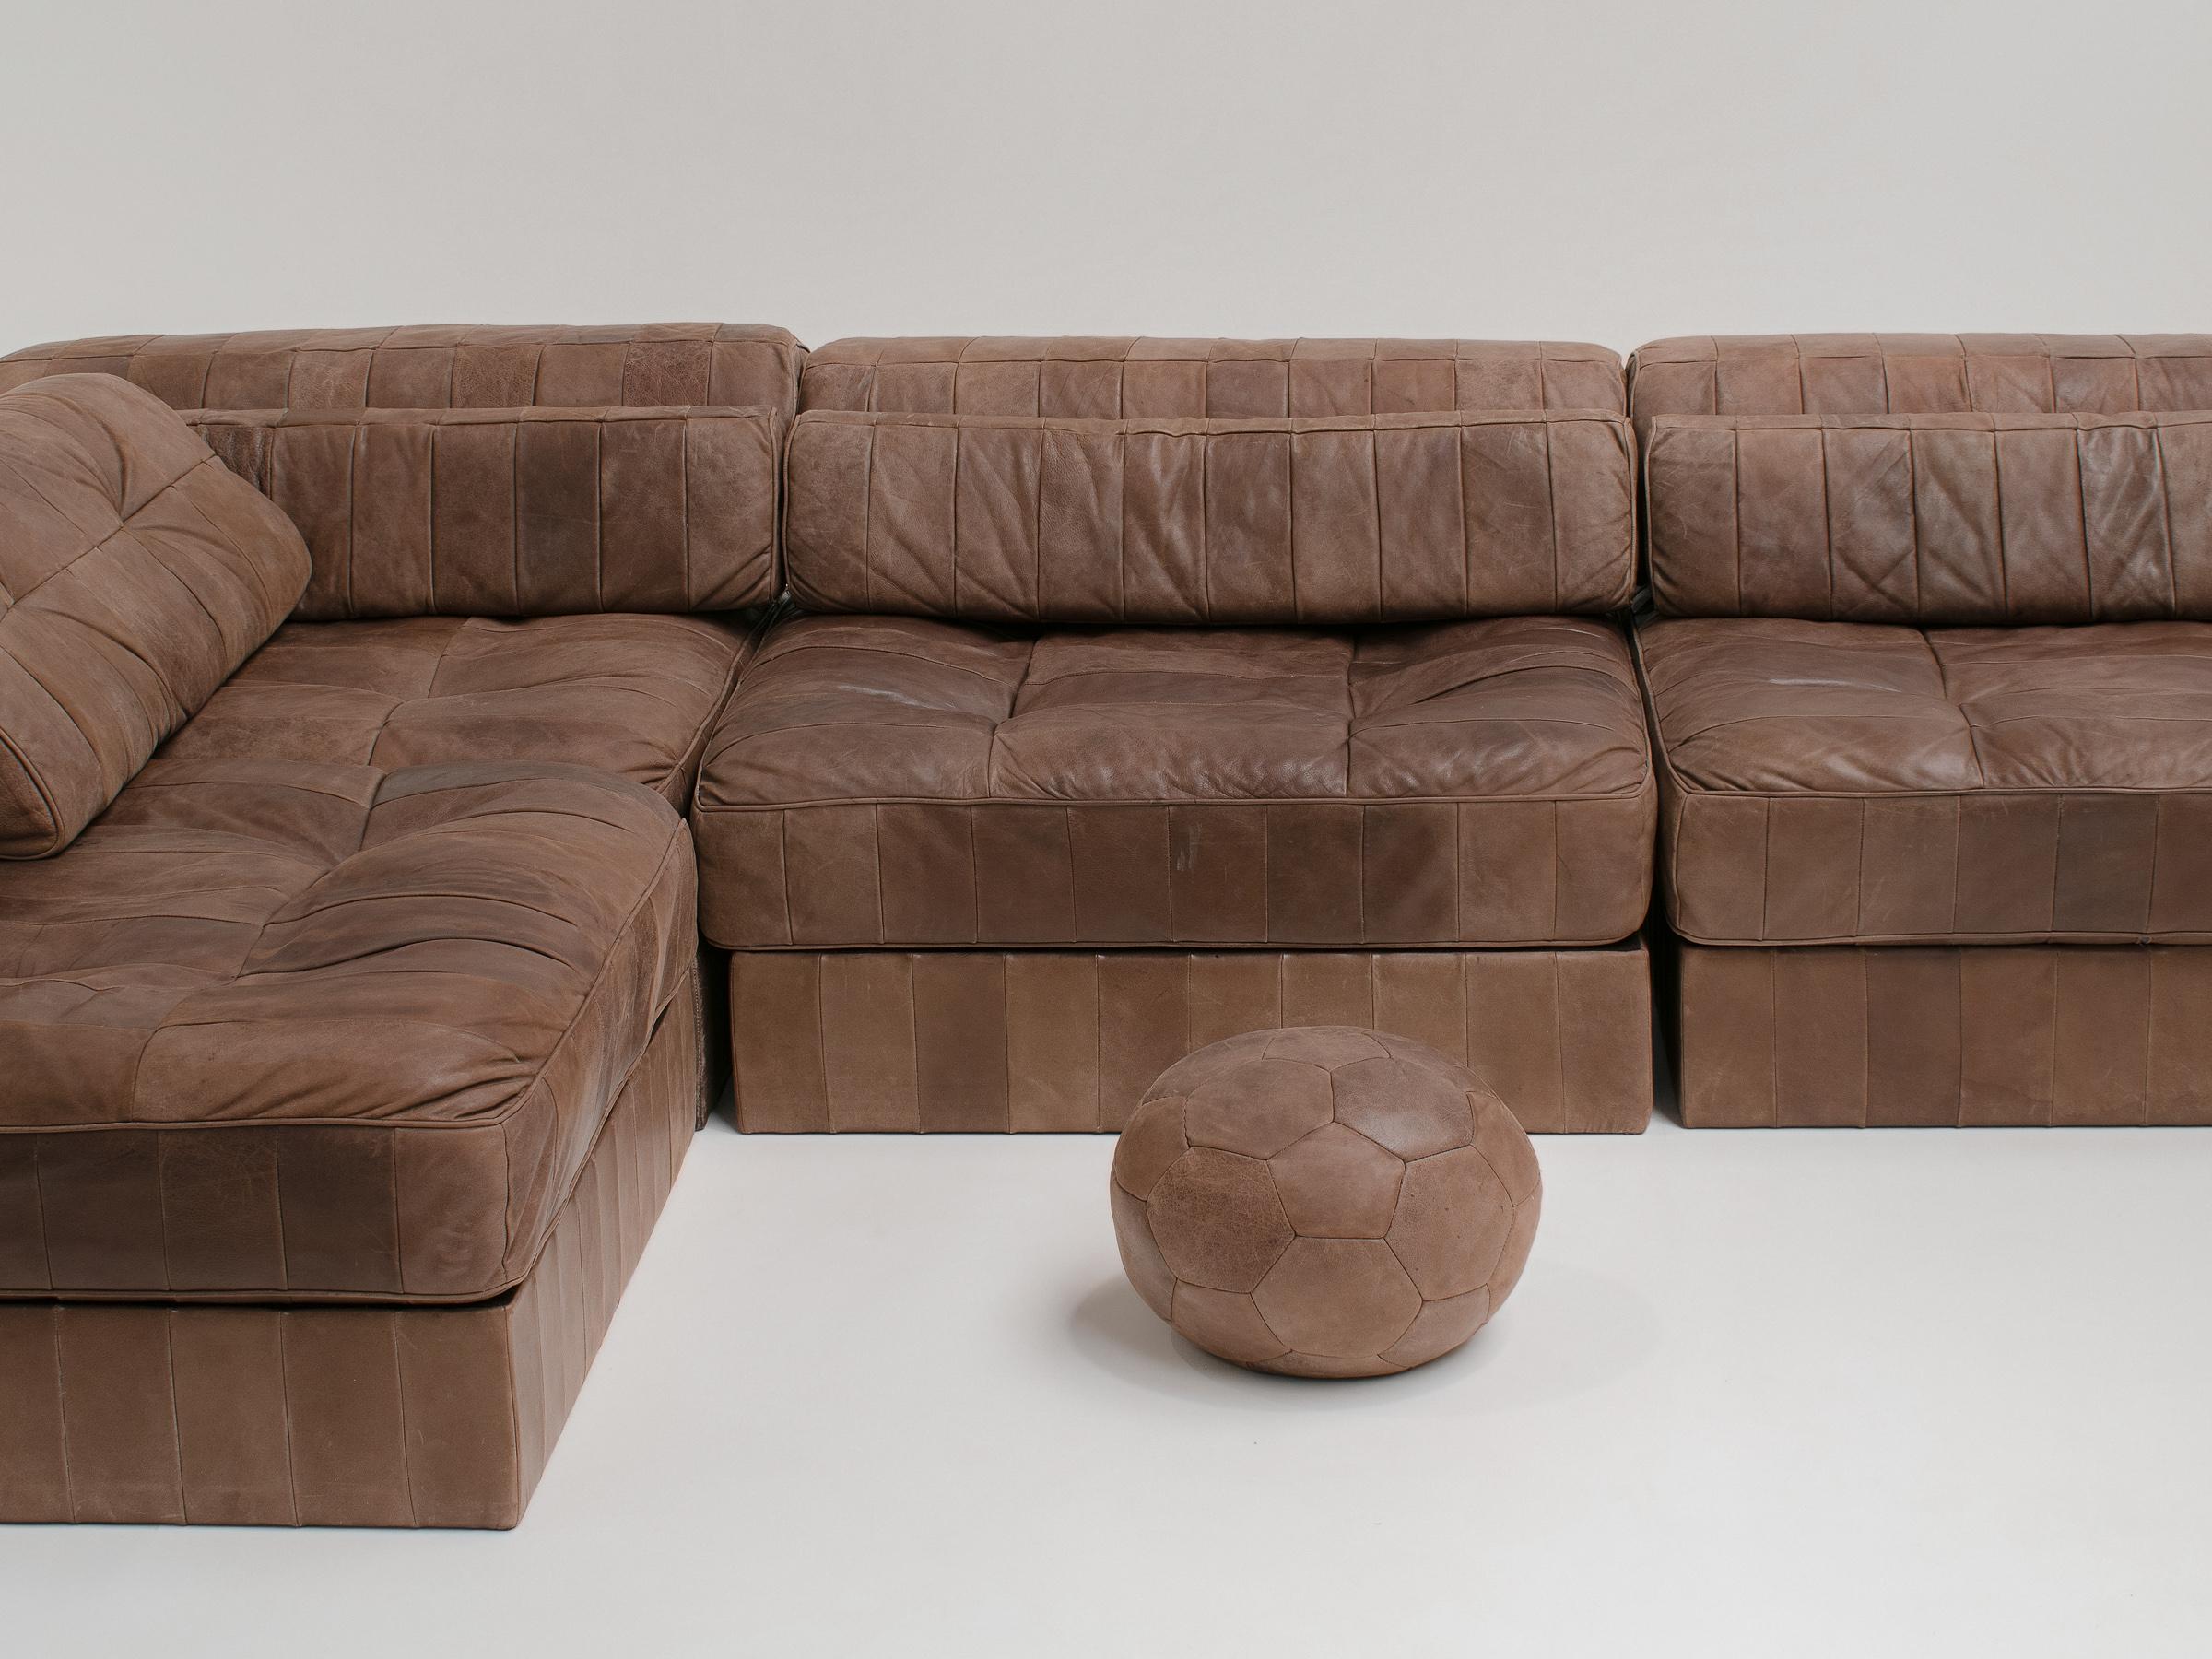 Swiss De Sede DS88 Modular Sofa in Brown Patchwork Leather, 1970s